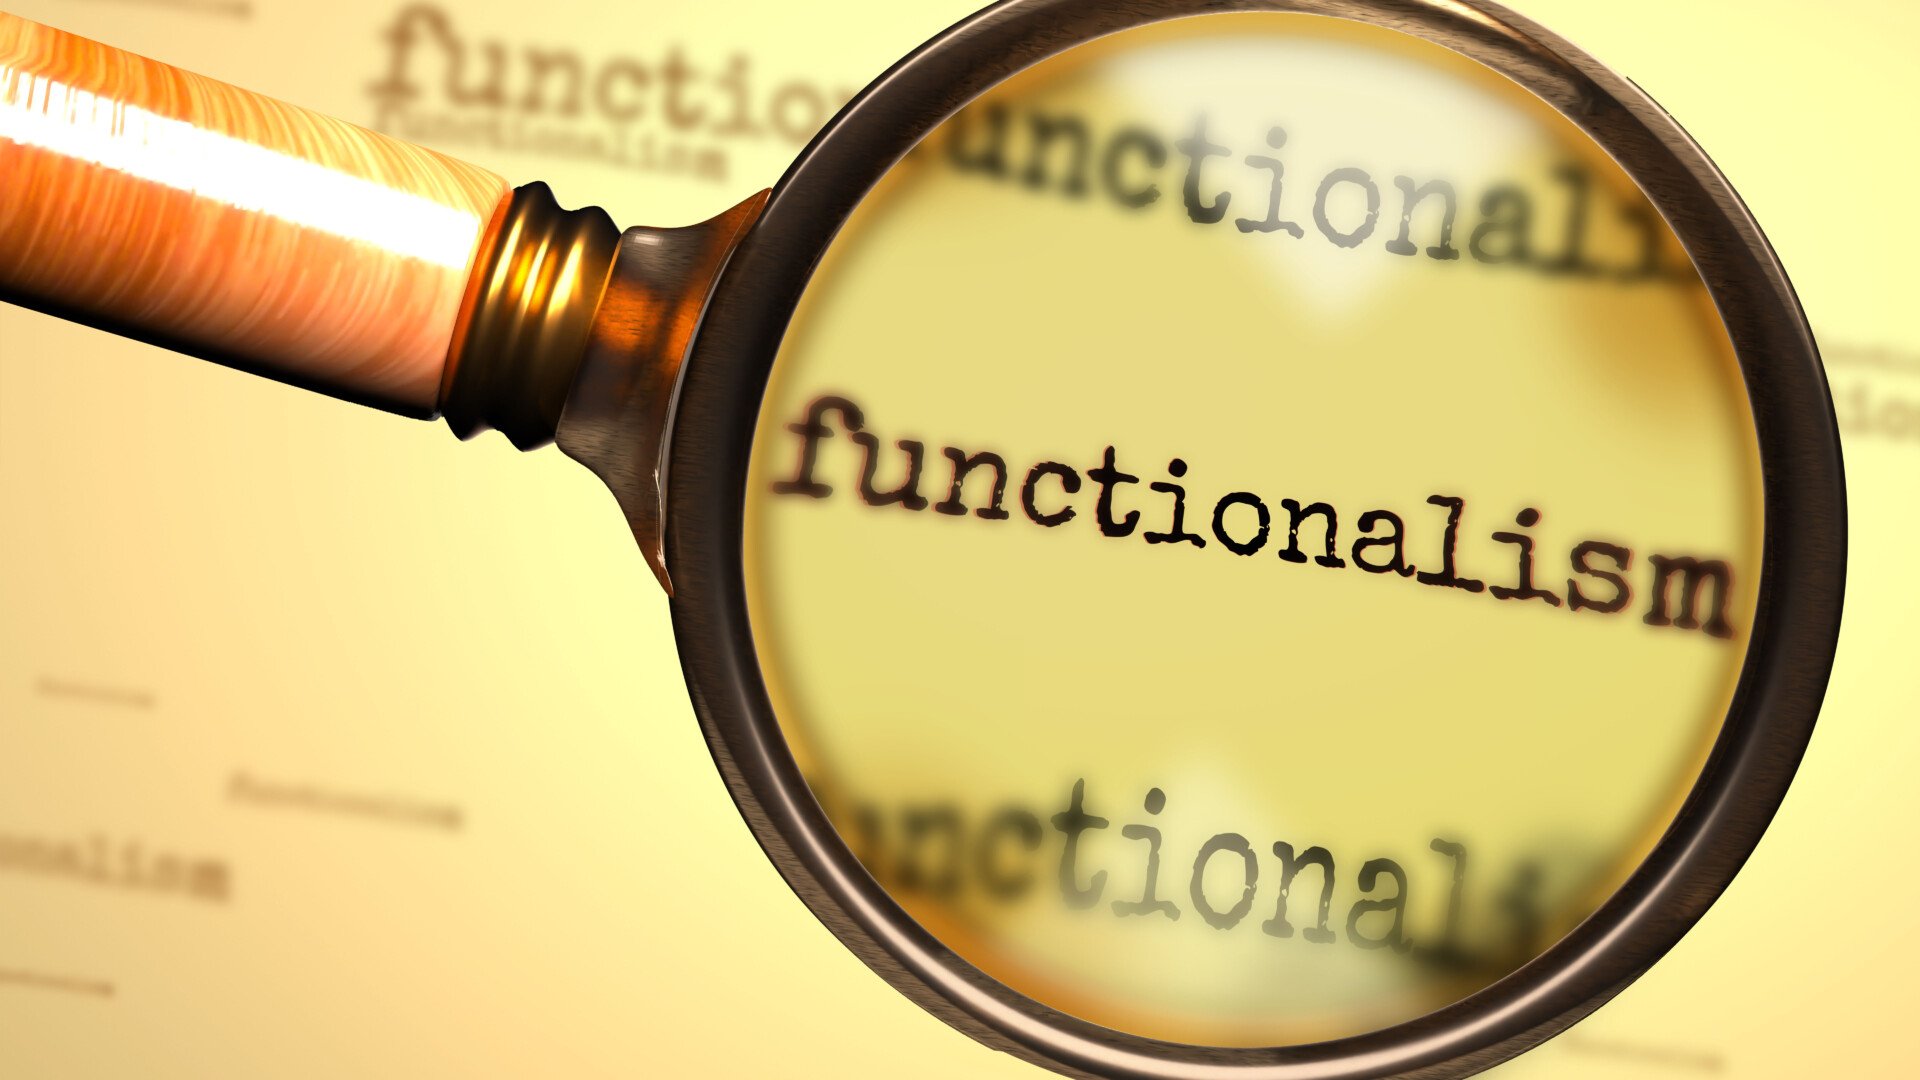 Functionalism and a magnifying glass on English word Functionalism to symbolize studying, examining or searching for an explanation and answers related to a concept of Functionalism